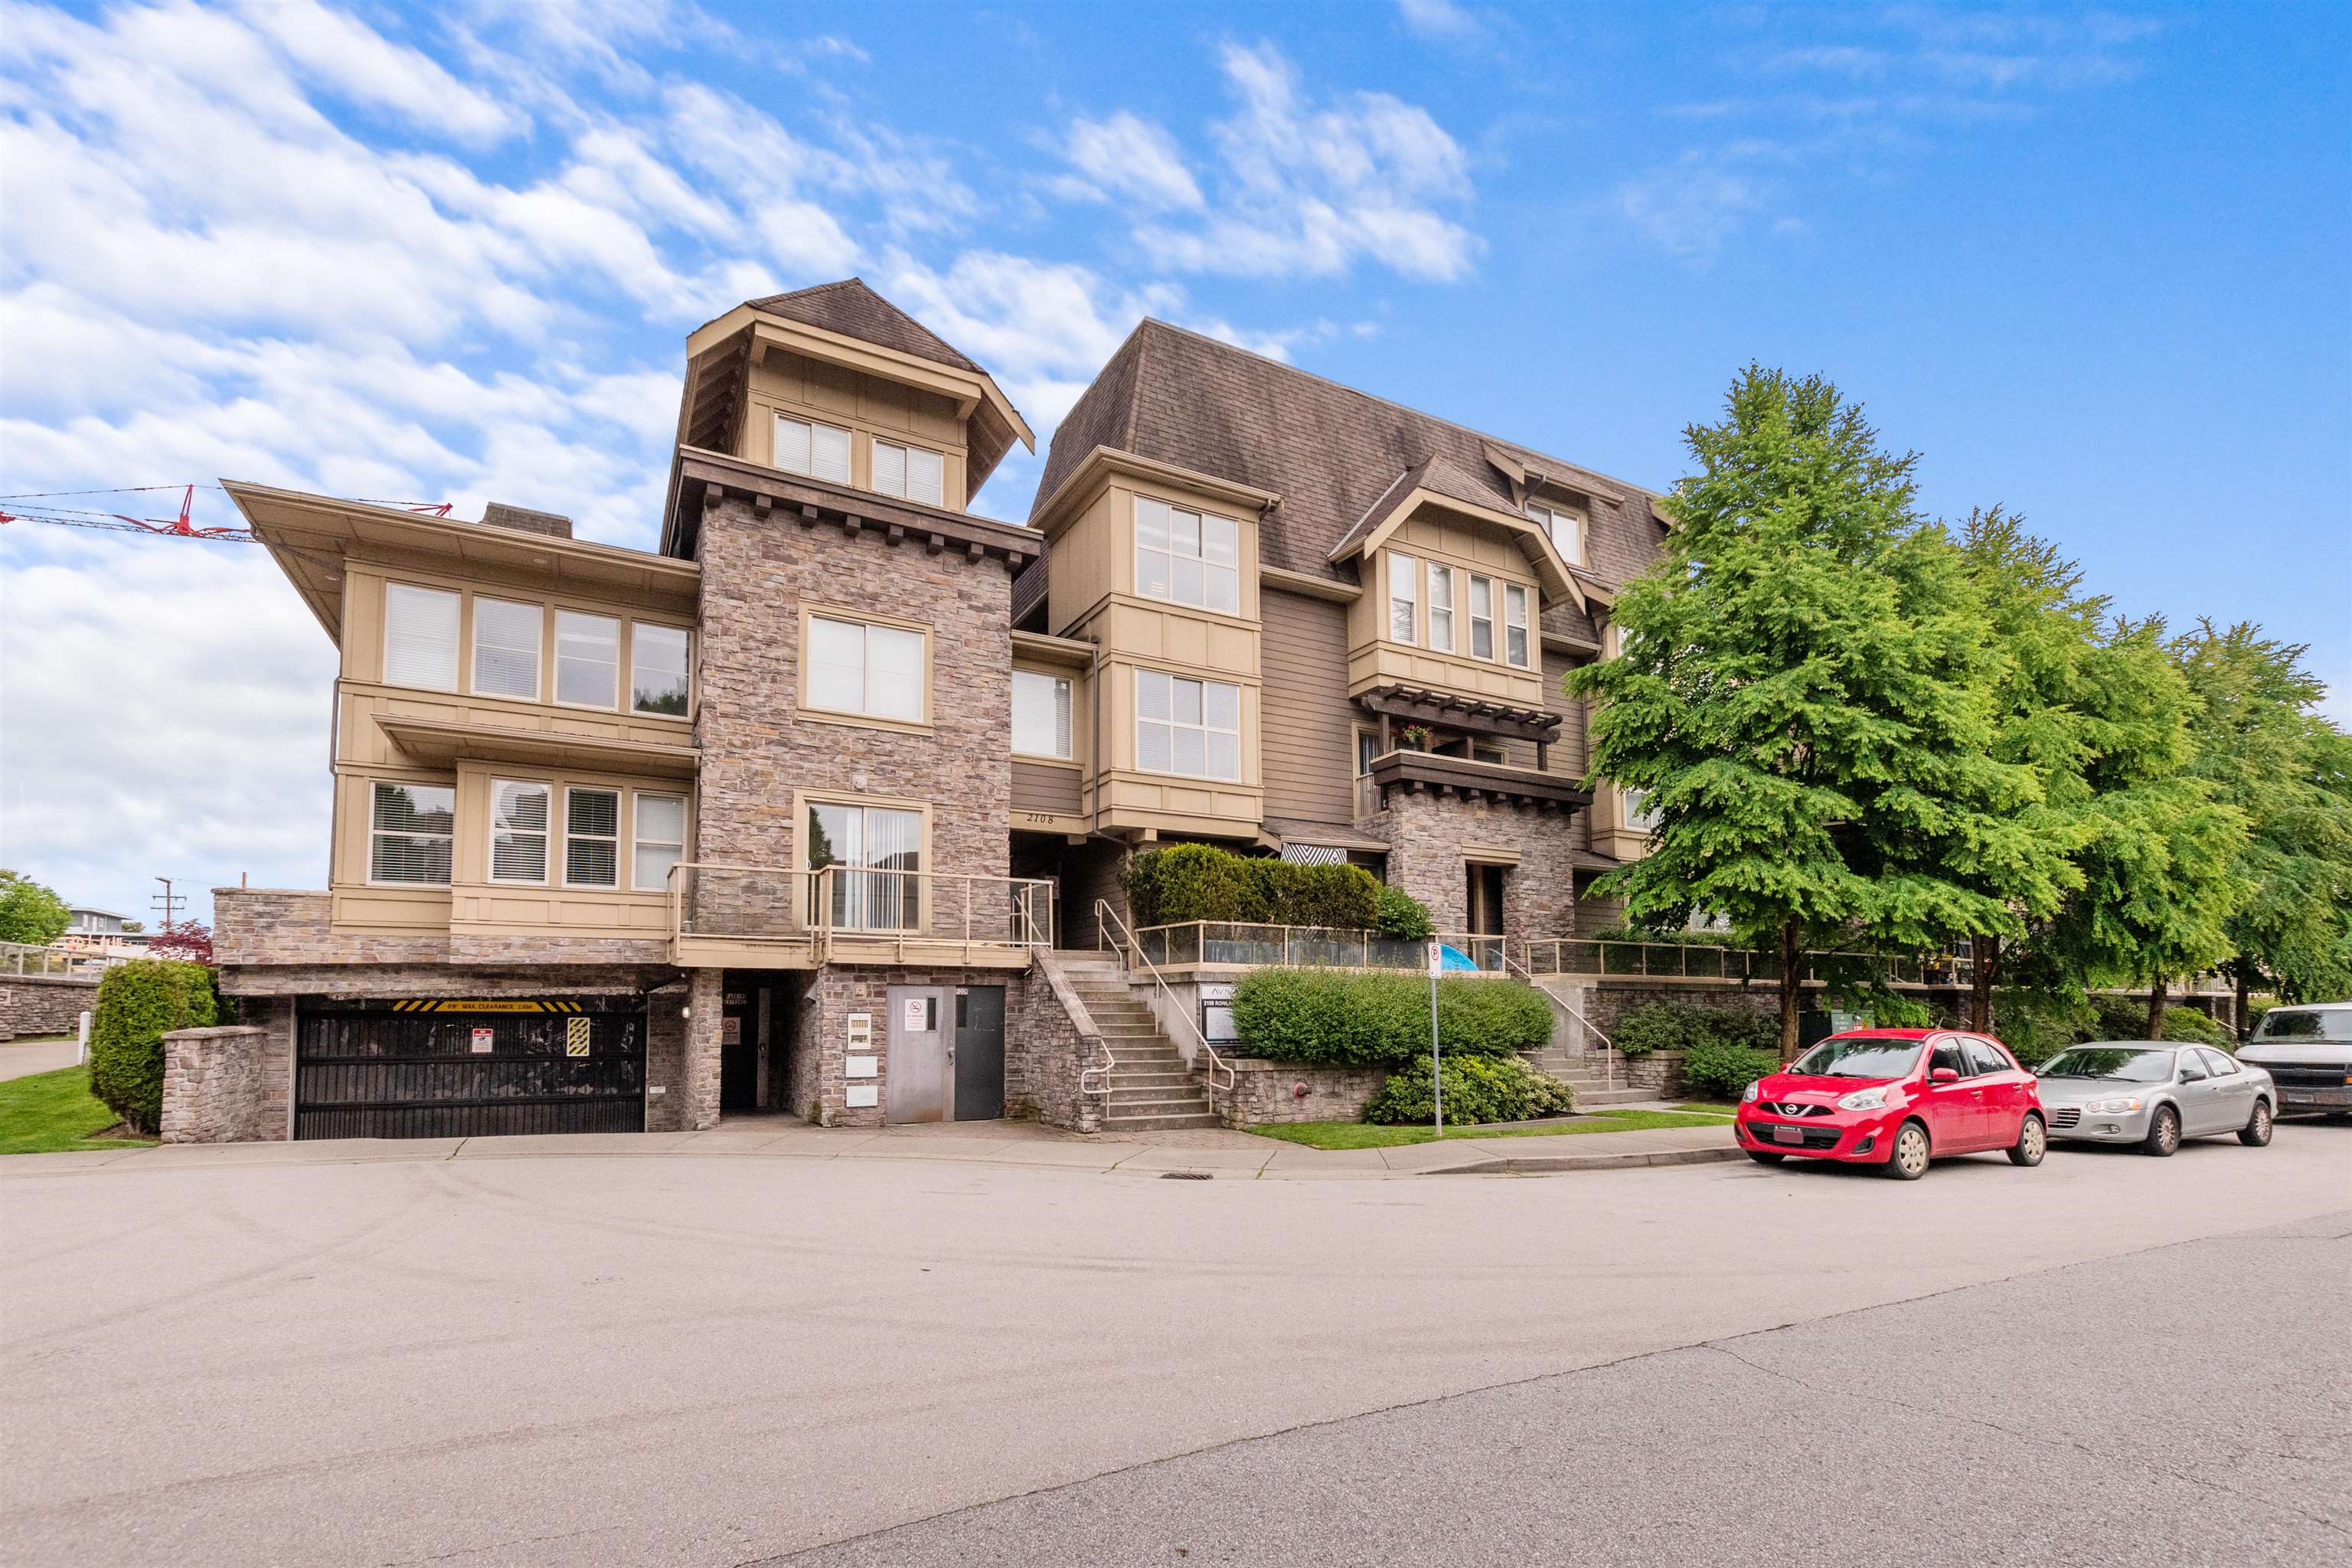 Central Pt Coquitlam Townhouse for sale:  3 bedroom 1,396 sq.ft. (Listed 2021-10-21)